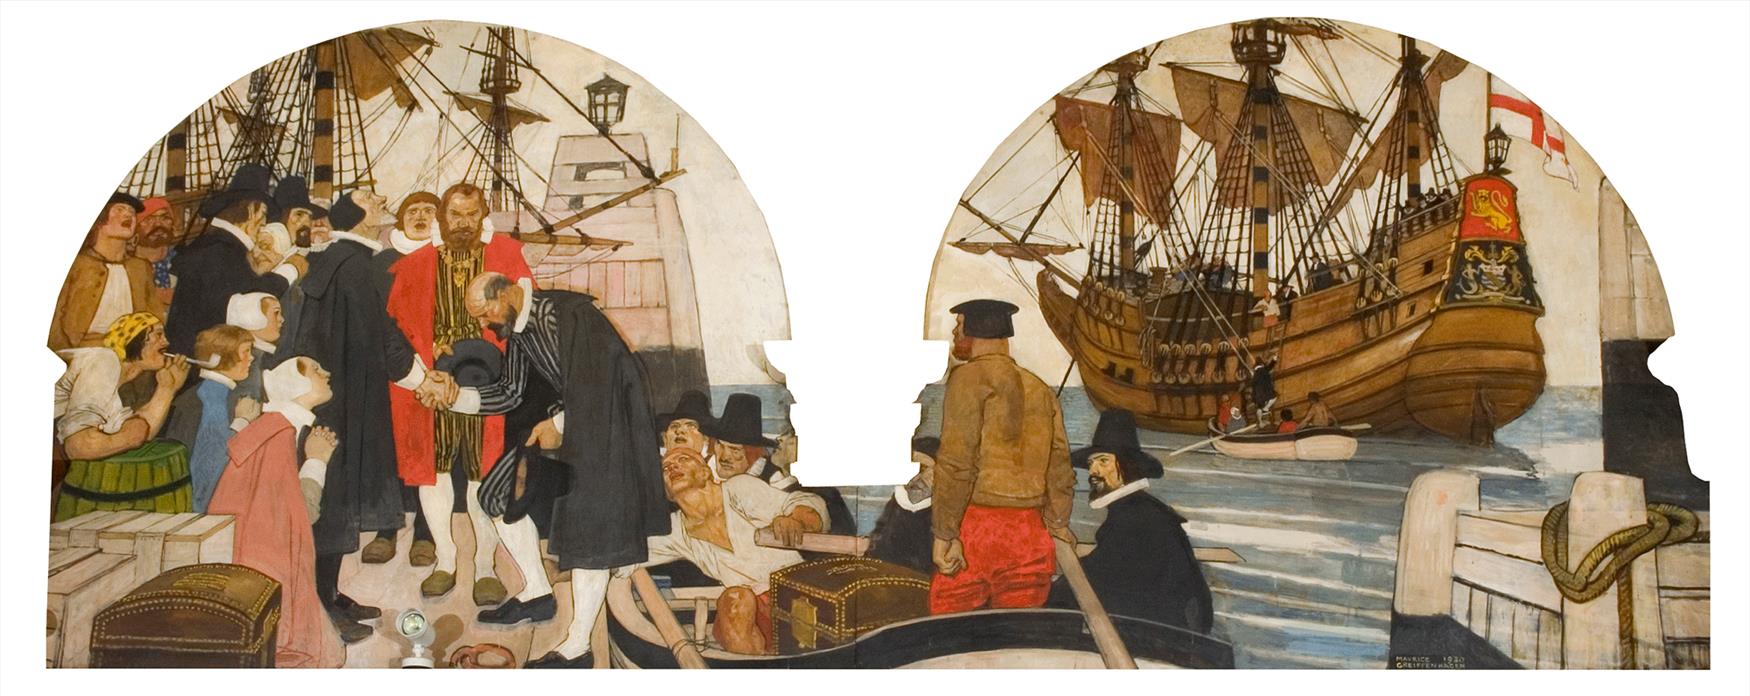 Painting depicting the ship